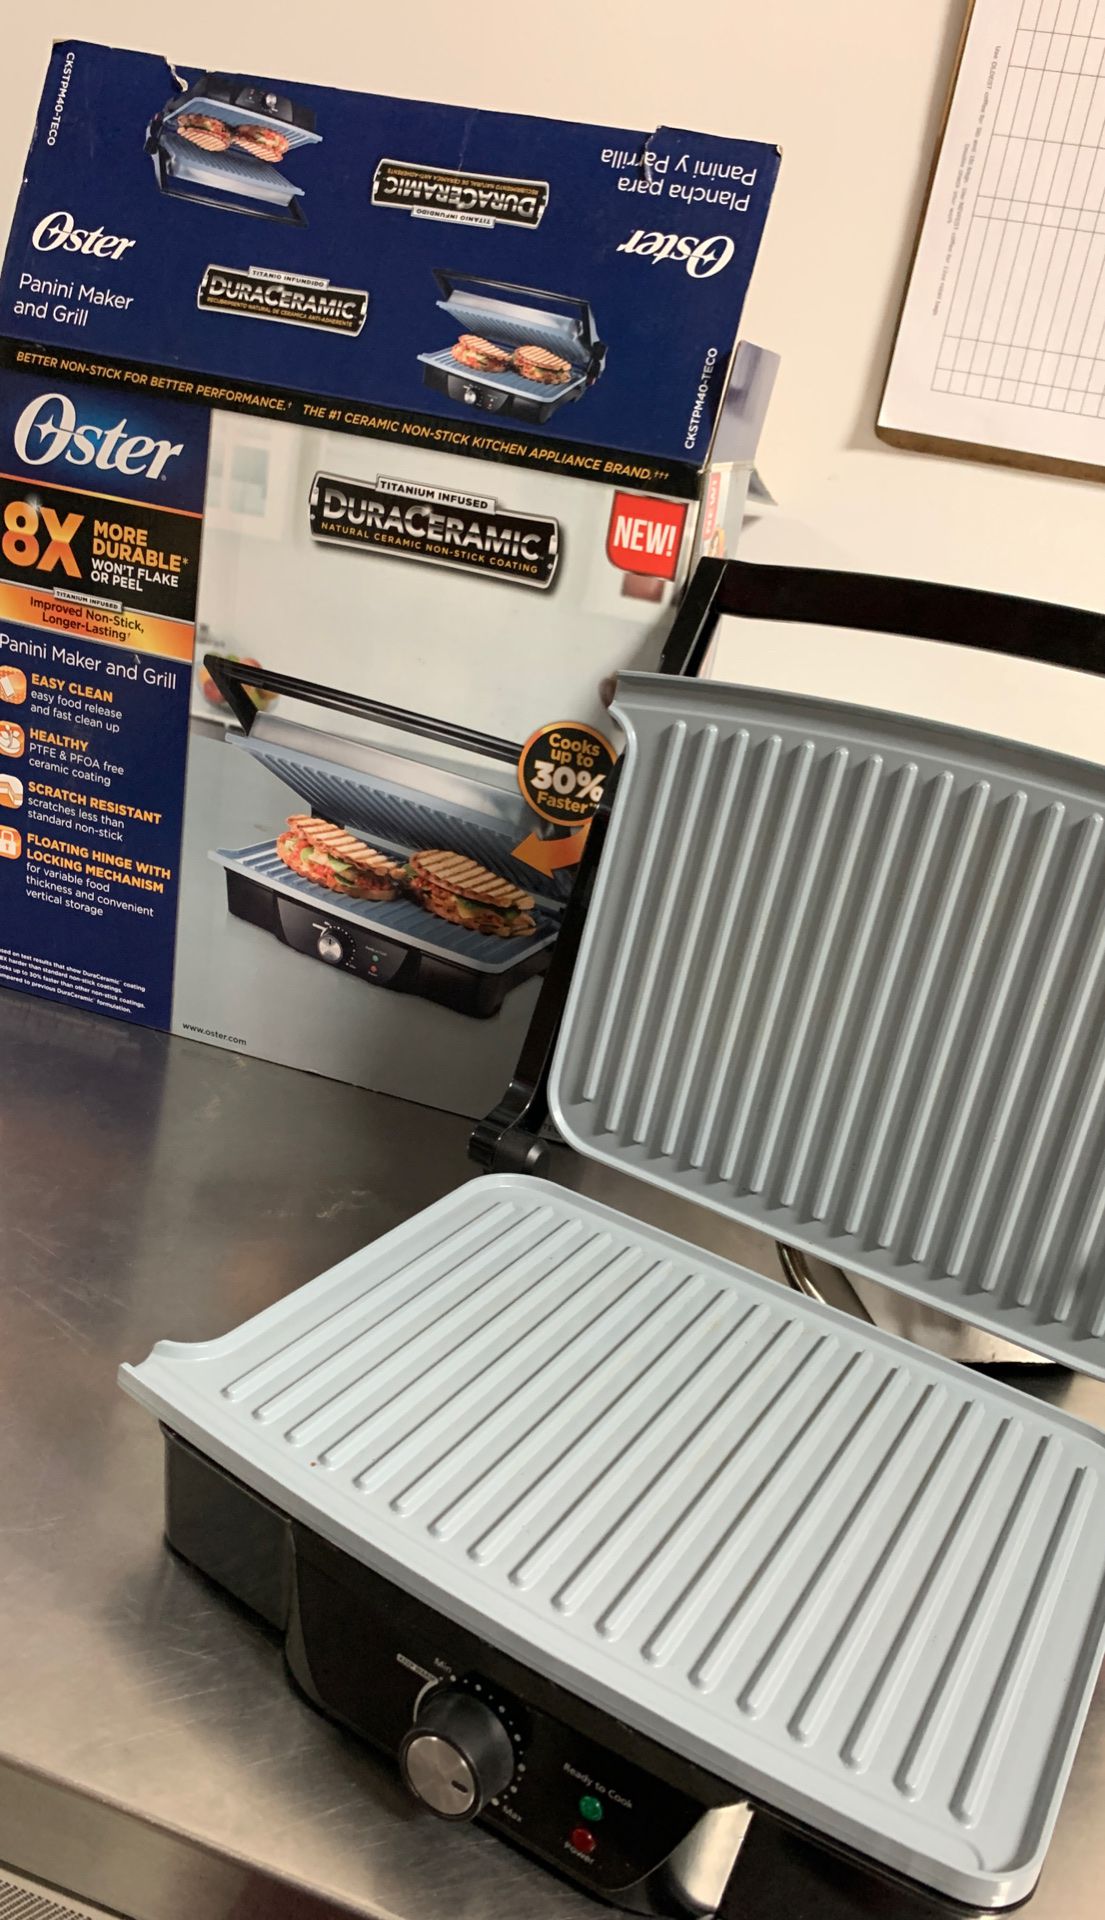 Oster CKSTM40-TECo Panini Maker and Indoor Grill